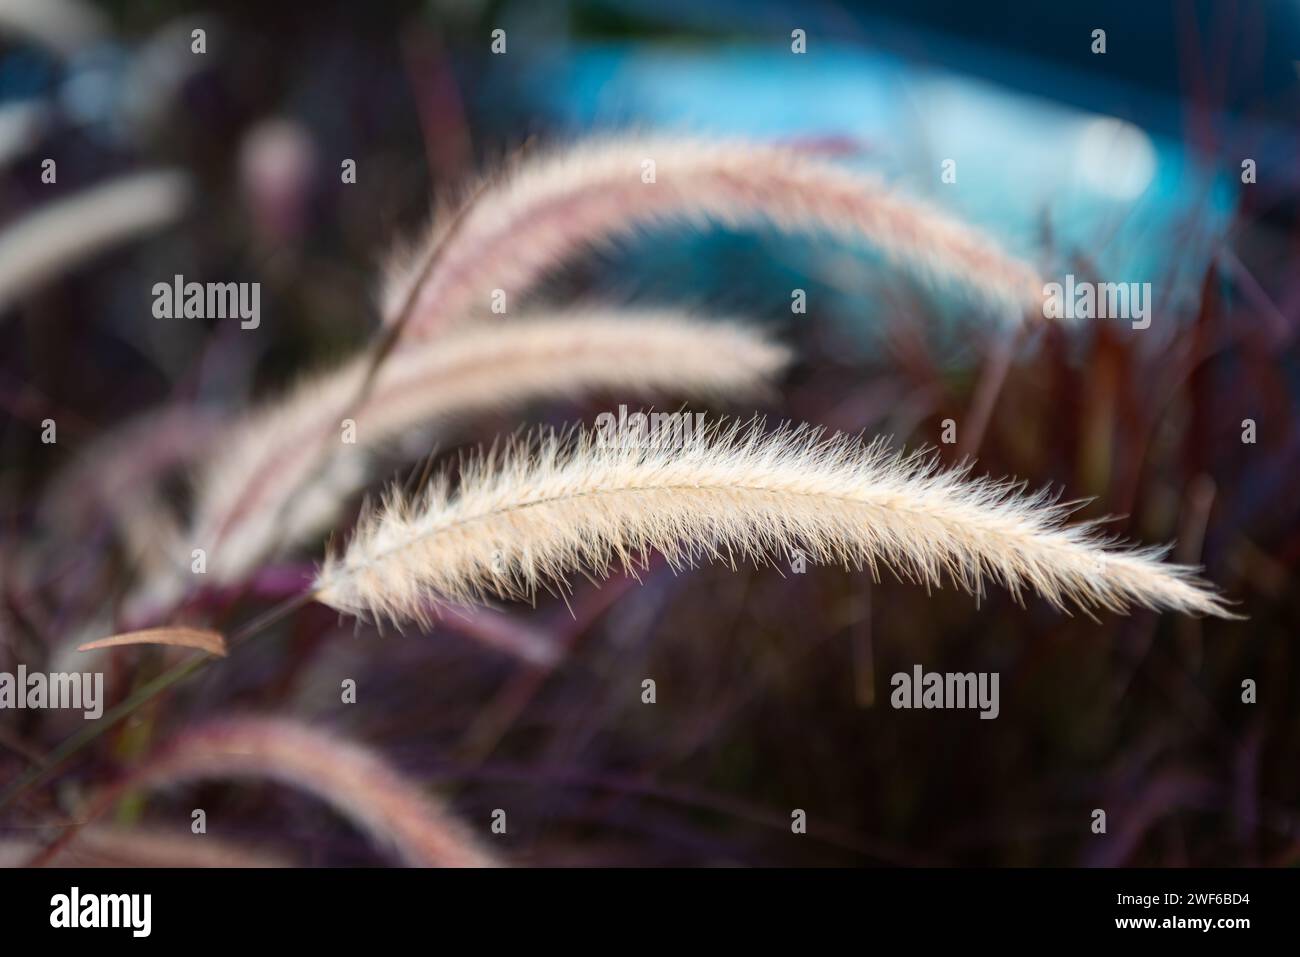 Cenchrus setaceus crimson fountain grass African tropical ornamental decorative plant used often in garden scaping around the world a bunch grass clos Stock Photo